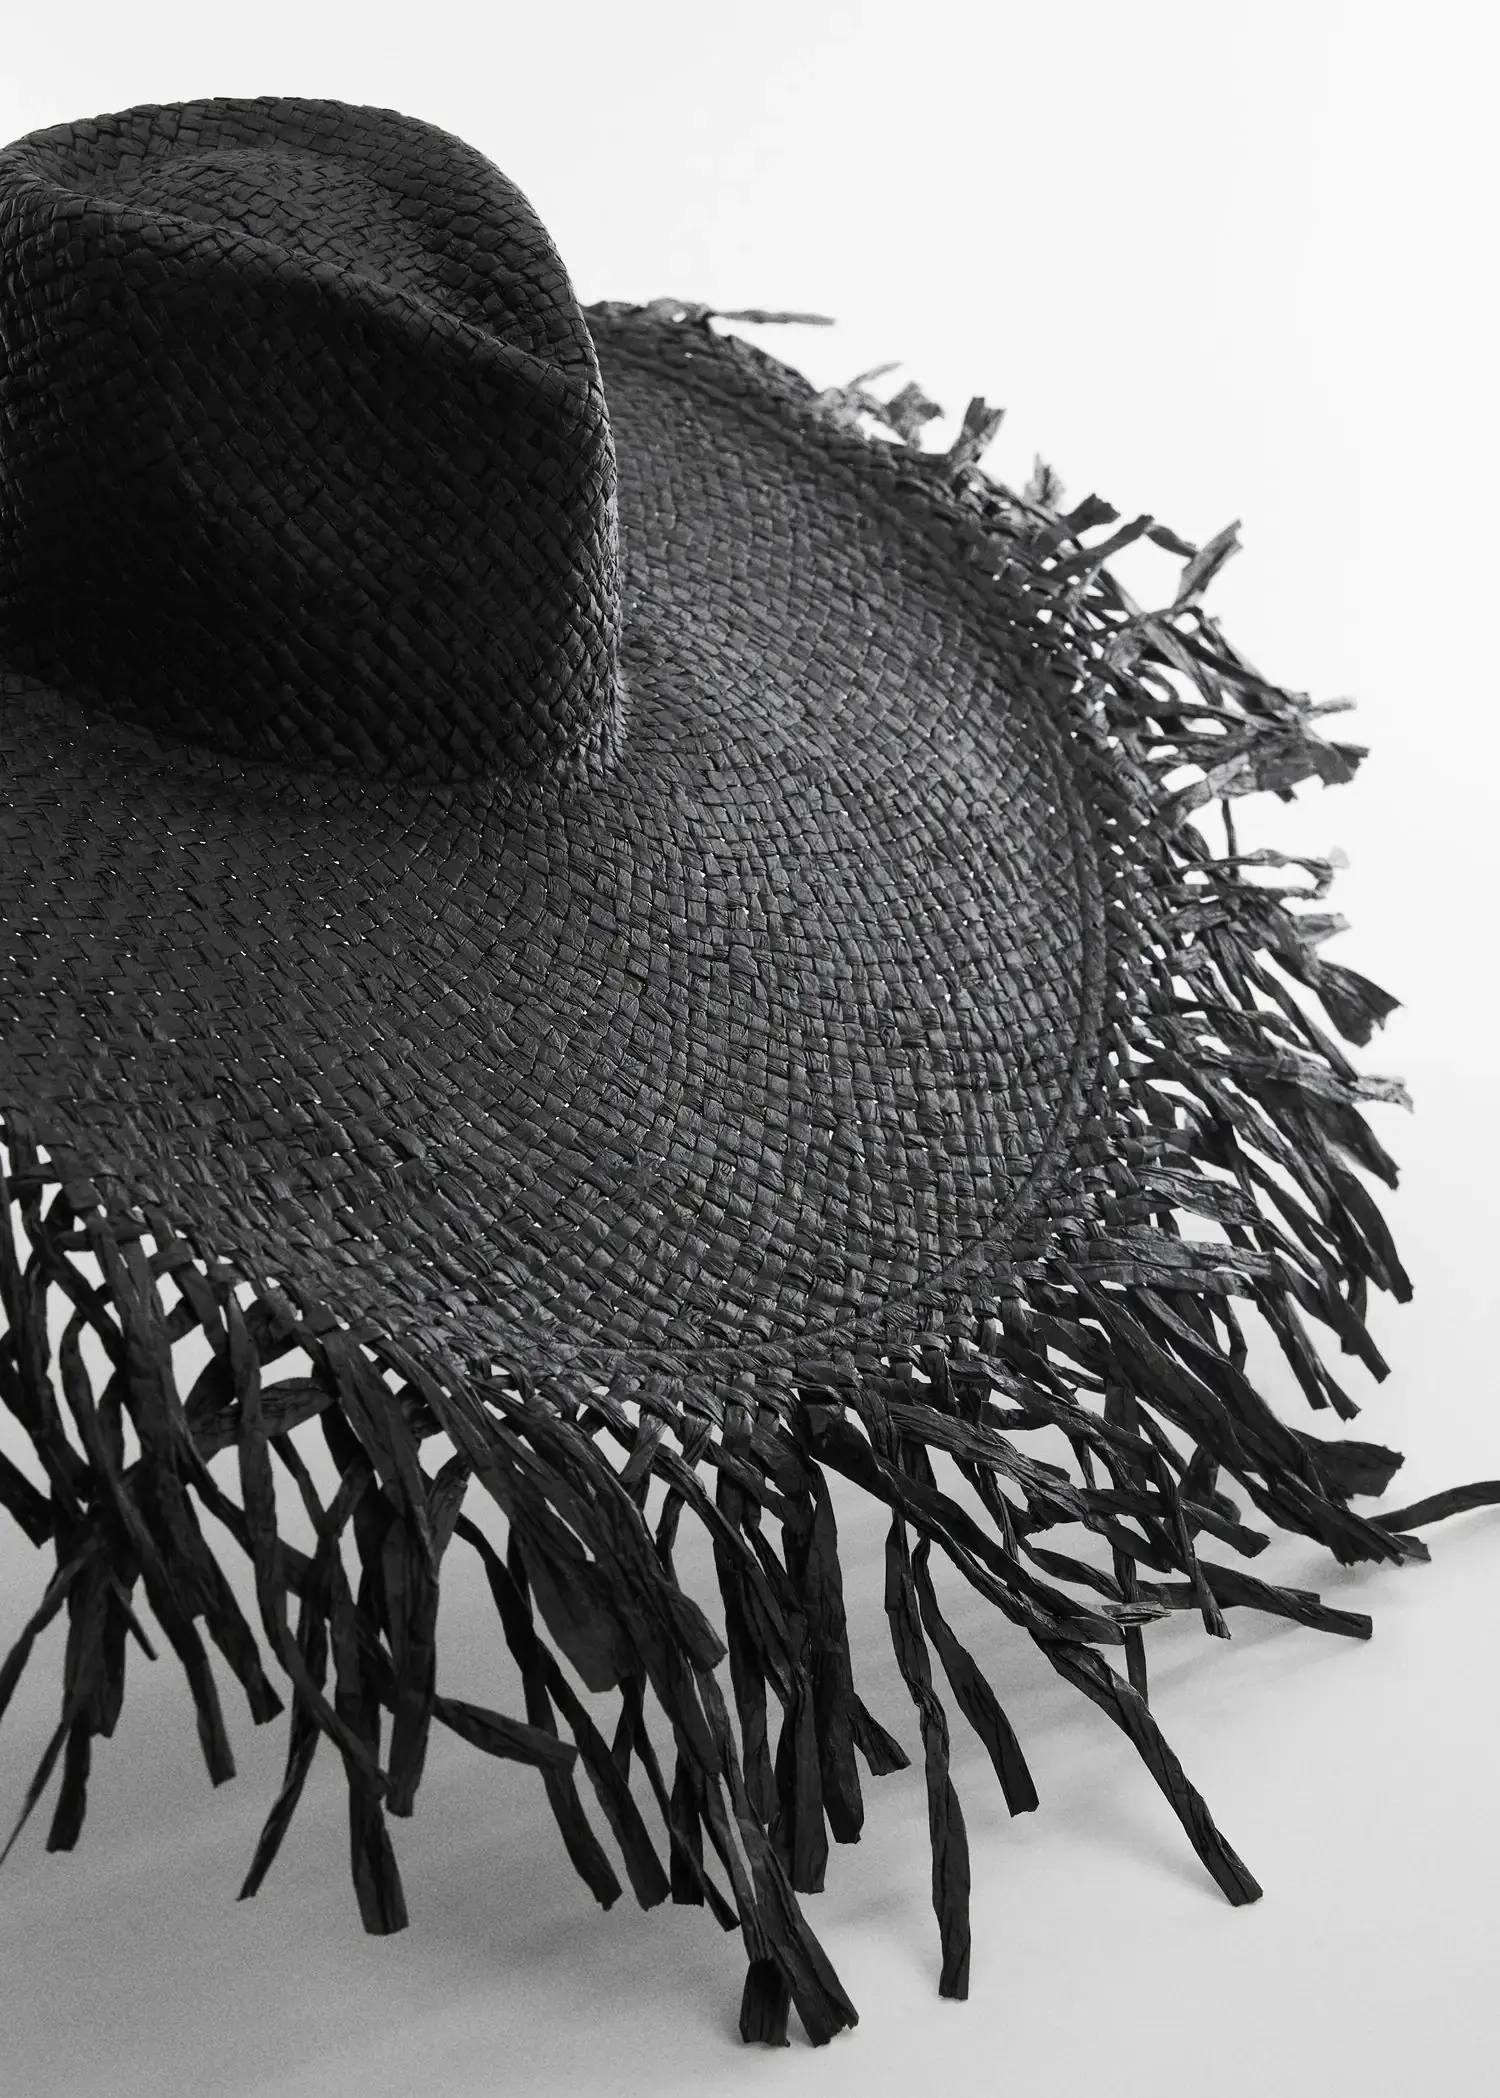 Mango Natural fiber maxi hat. a close-up of a black straw hat with fringes 